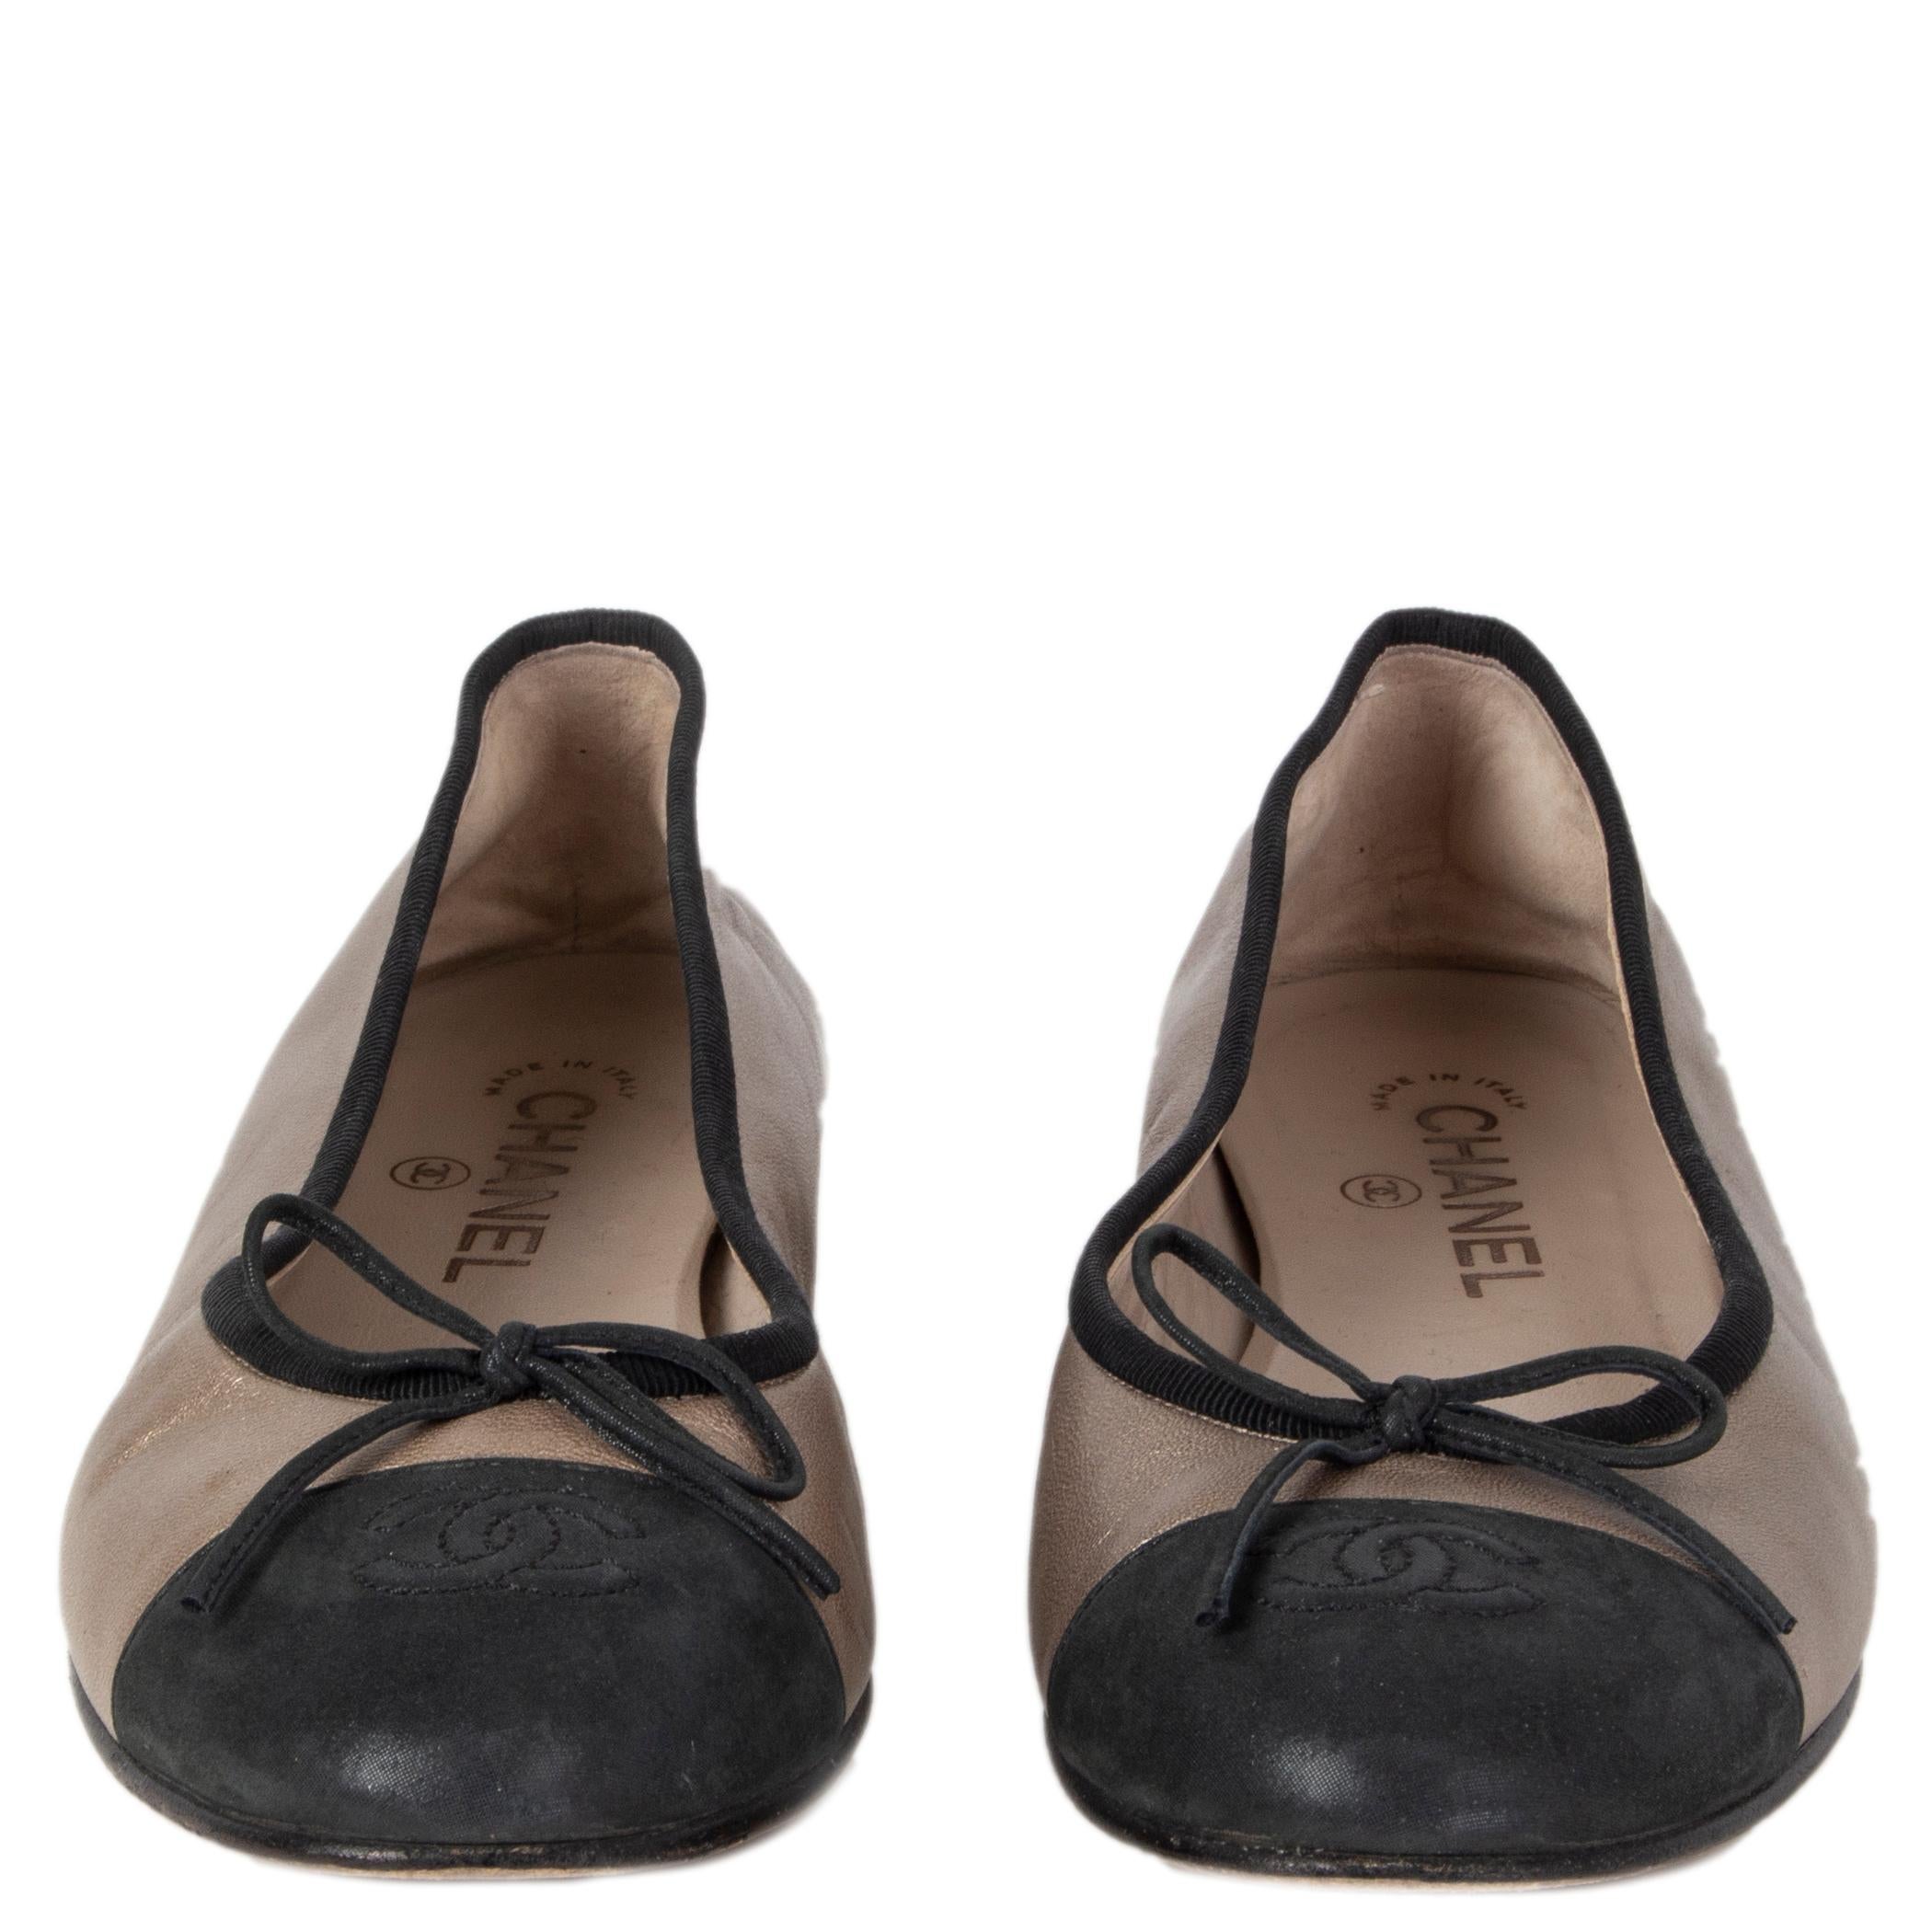 100% authentic Chanel ballerinas in lamintaed beige goatskin with a black tip. Have been worn and are in excellent condition. Come with dust bags. 

Measurements
Imprinted Size	39.5
Shoe Size	39.5
Inside Sole	25.5cm (9.9in)
Width	8cm